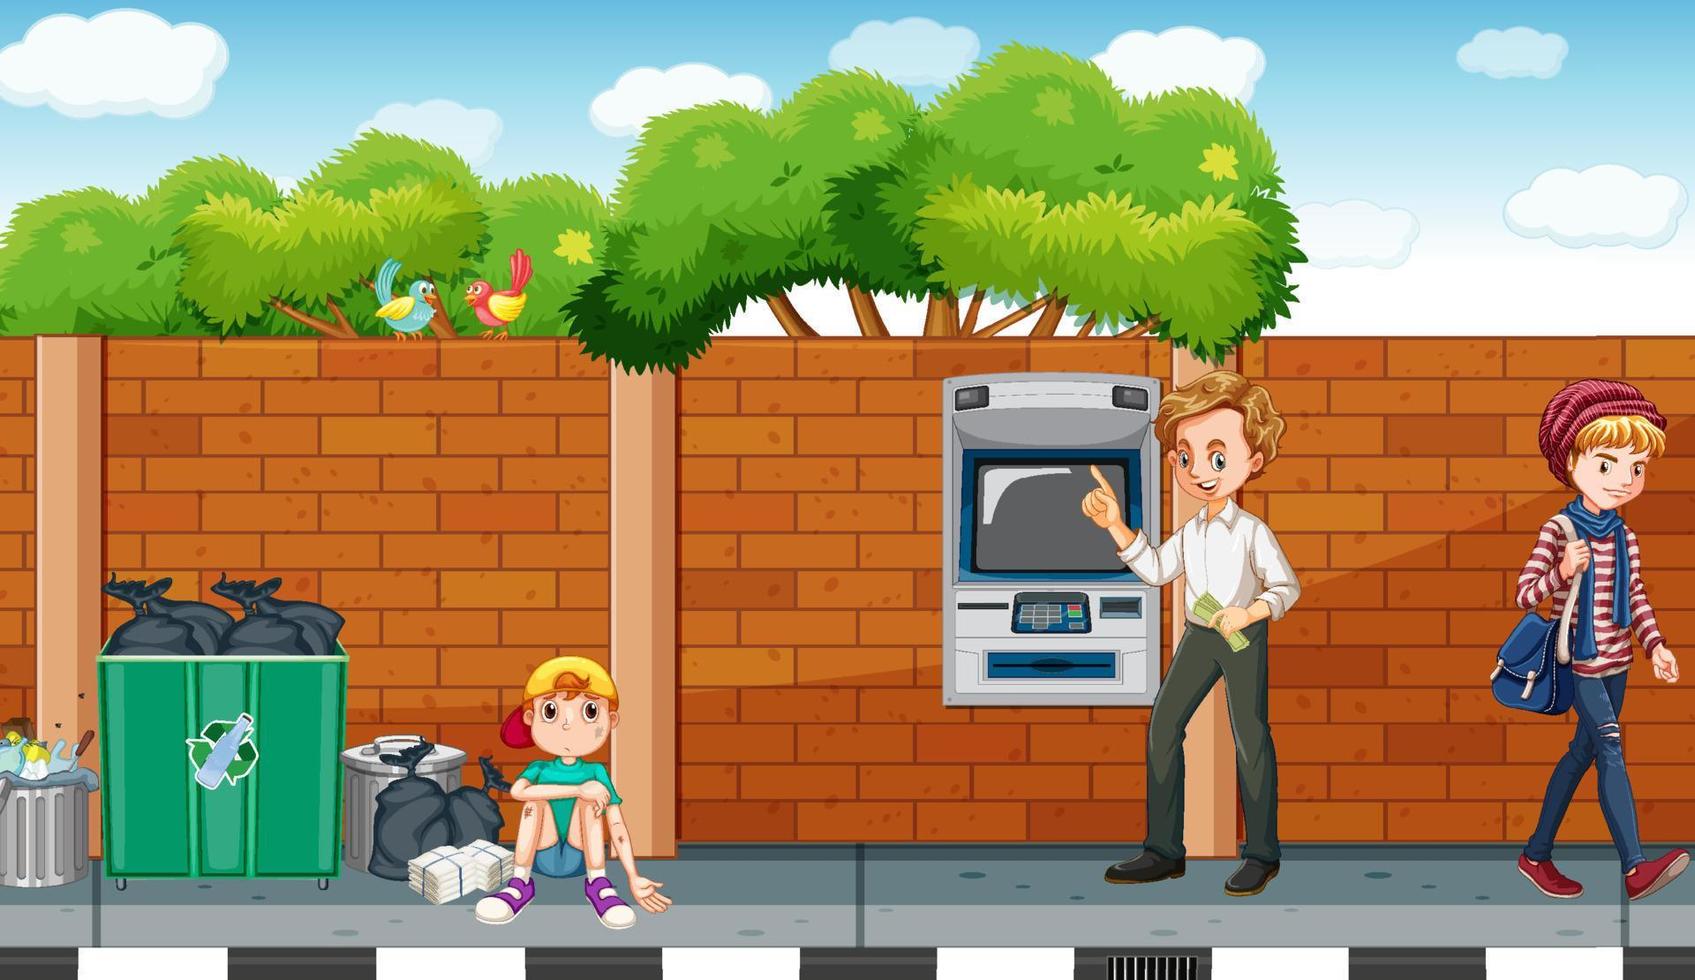 ATM machine street scene with people vector